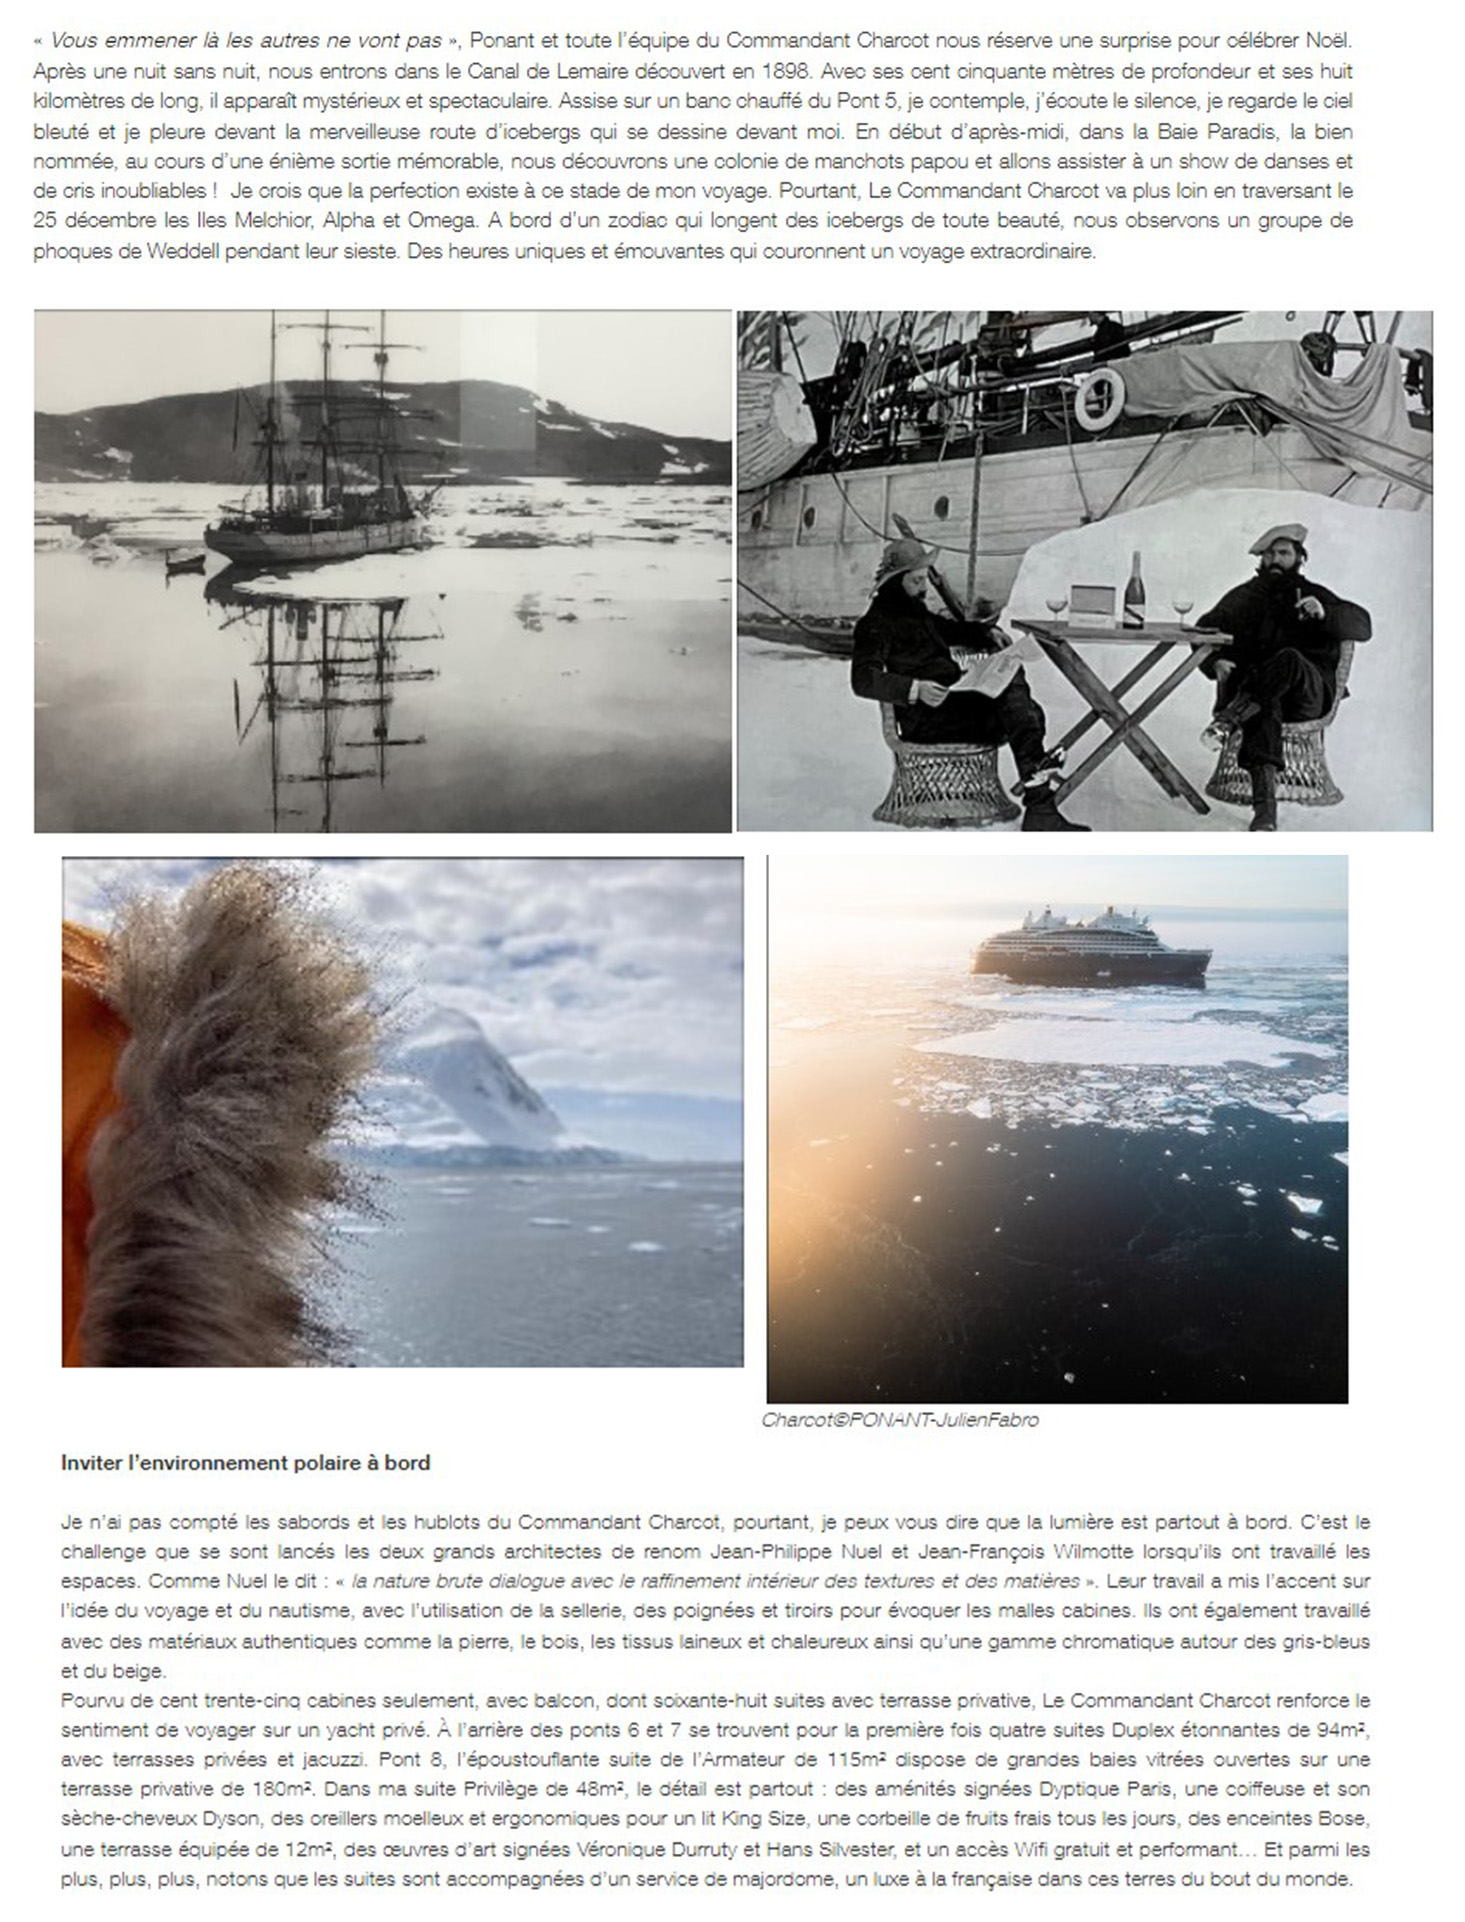 Article from the webmagazine Attitude luxe on the Commandant Charcot page 1, on the polar exploration ship with passengers